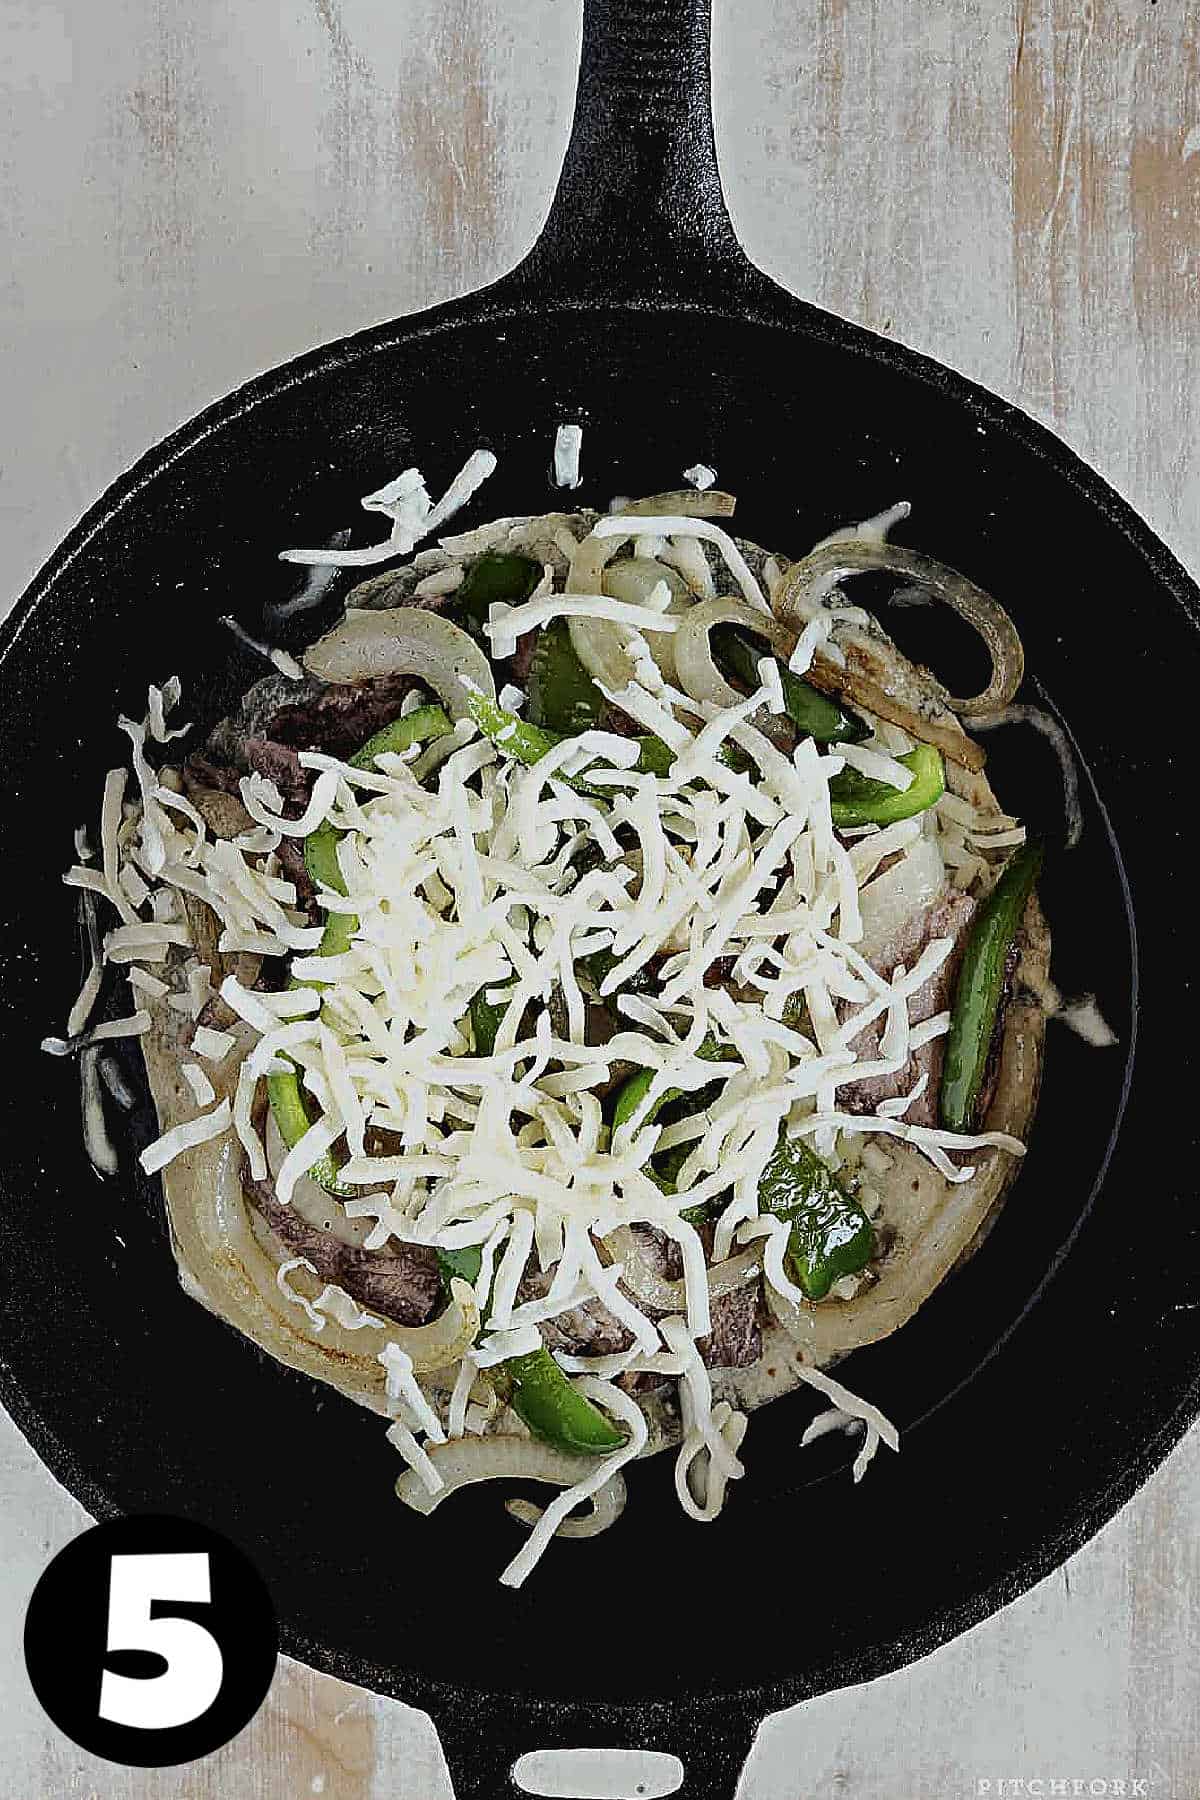 A quesadilla with steak and cheese in a cast iron skillet.